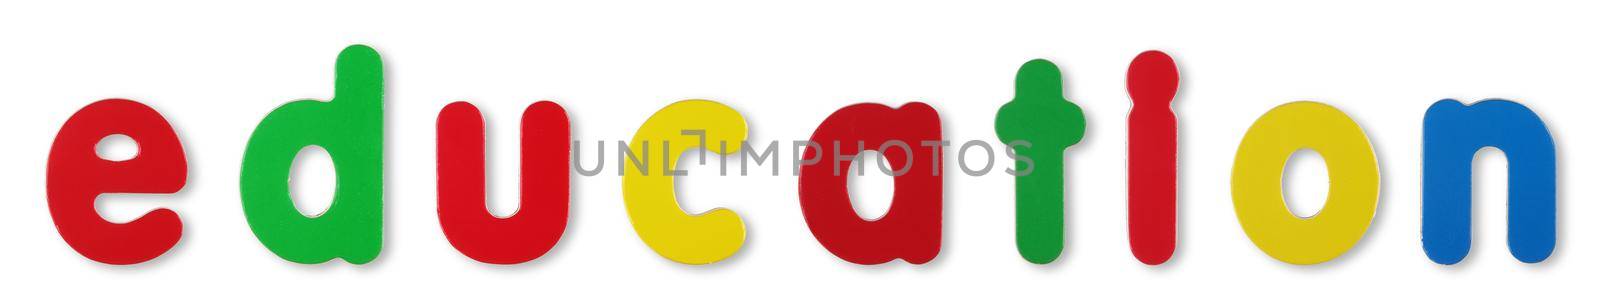 Education concept coloured magnetic letters on white with clipping path to remove shadow